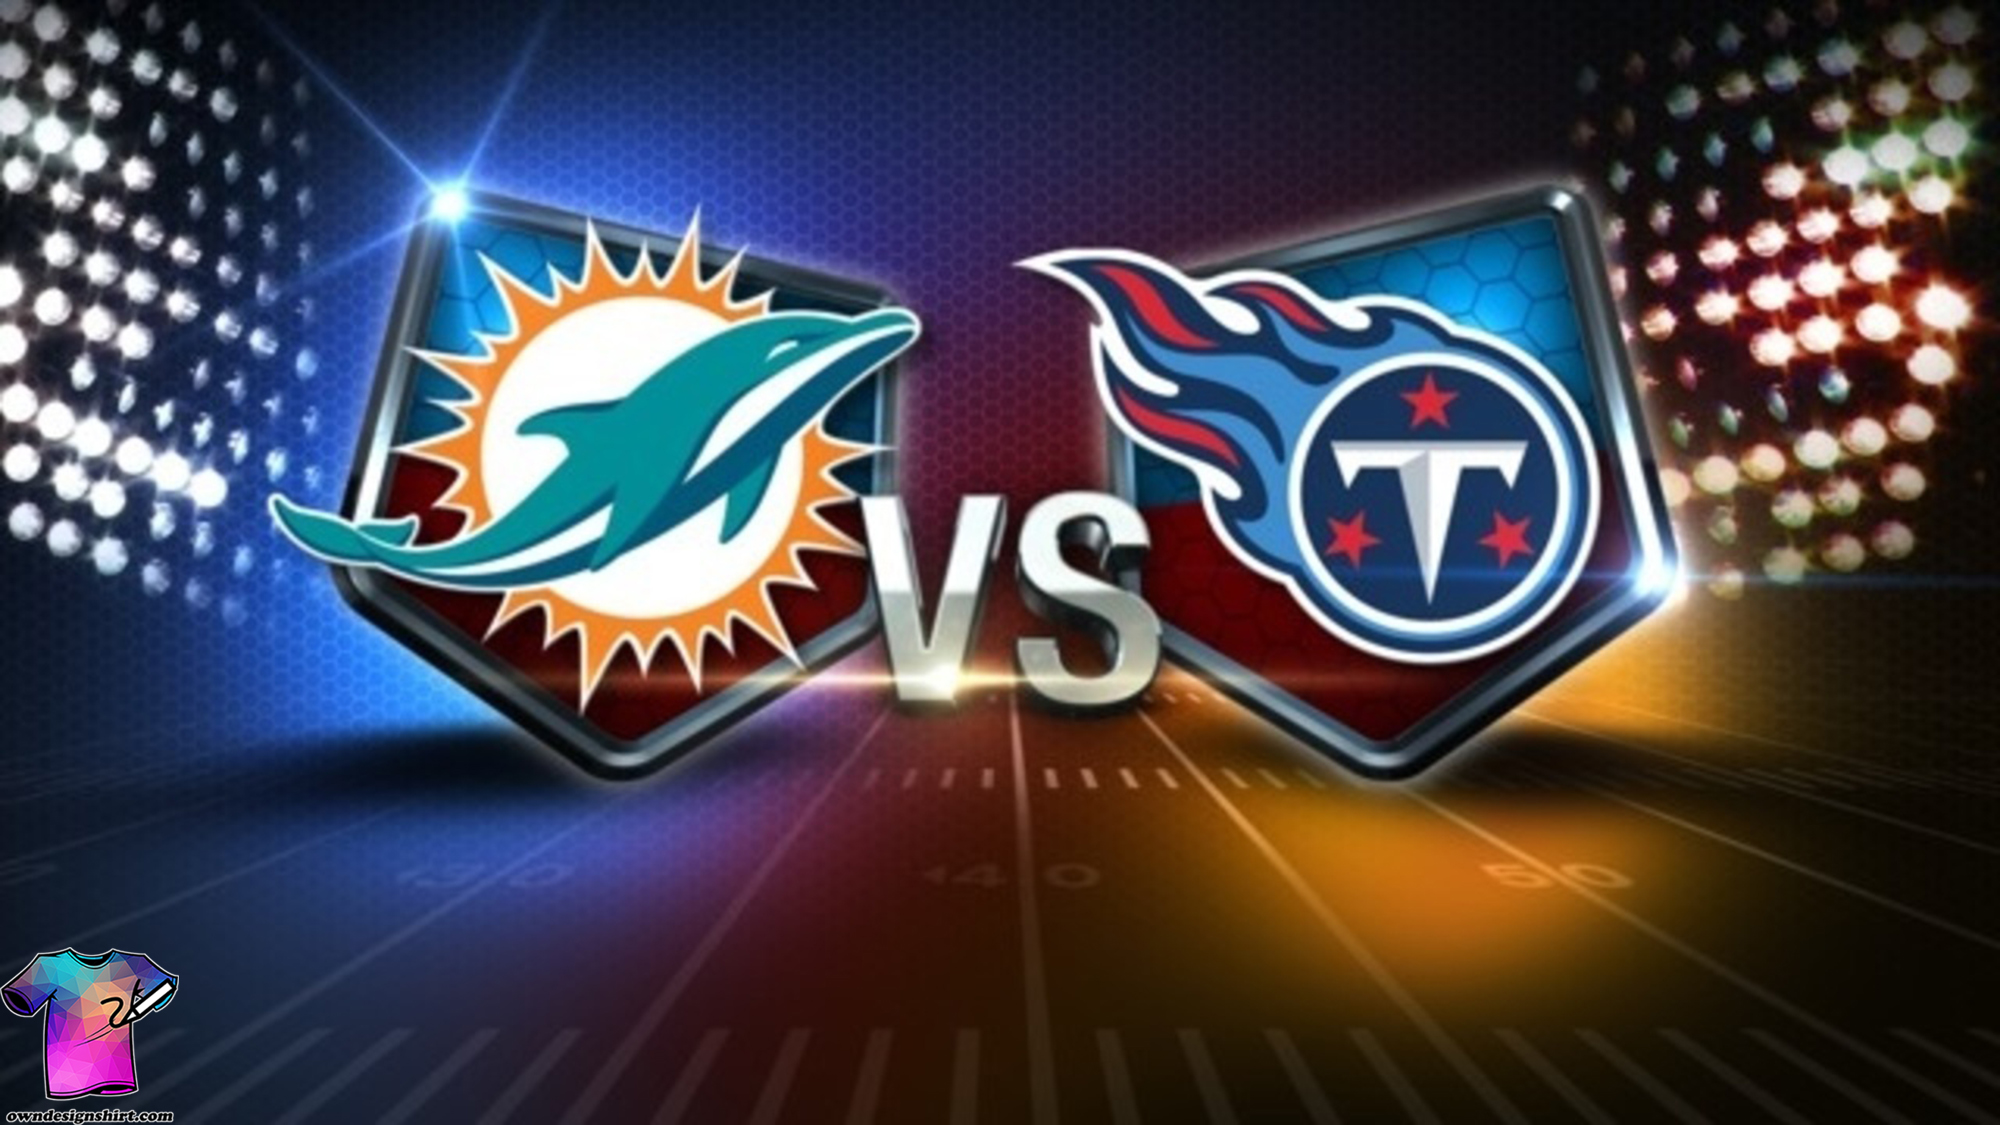 Gridiron Clash Tennessee Titans vs. Miami Dolphins in Week 14 Super Bowl LVII 2023